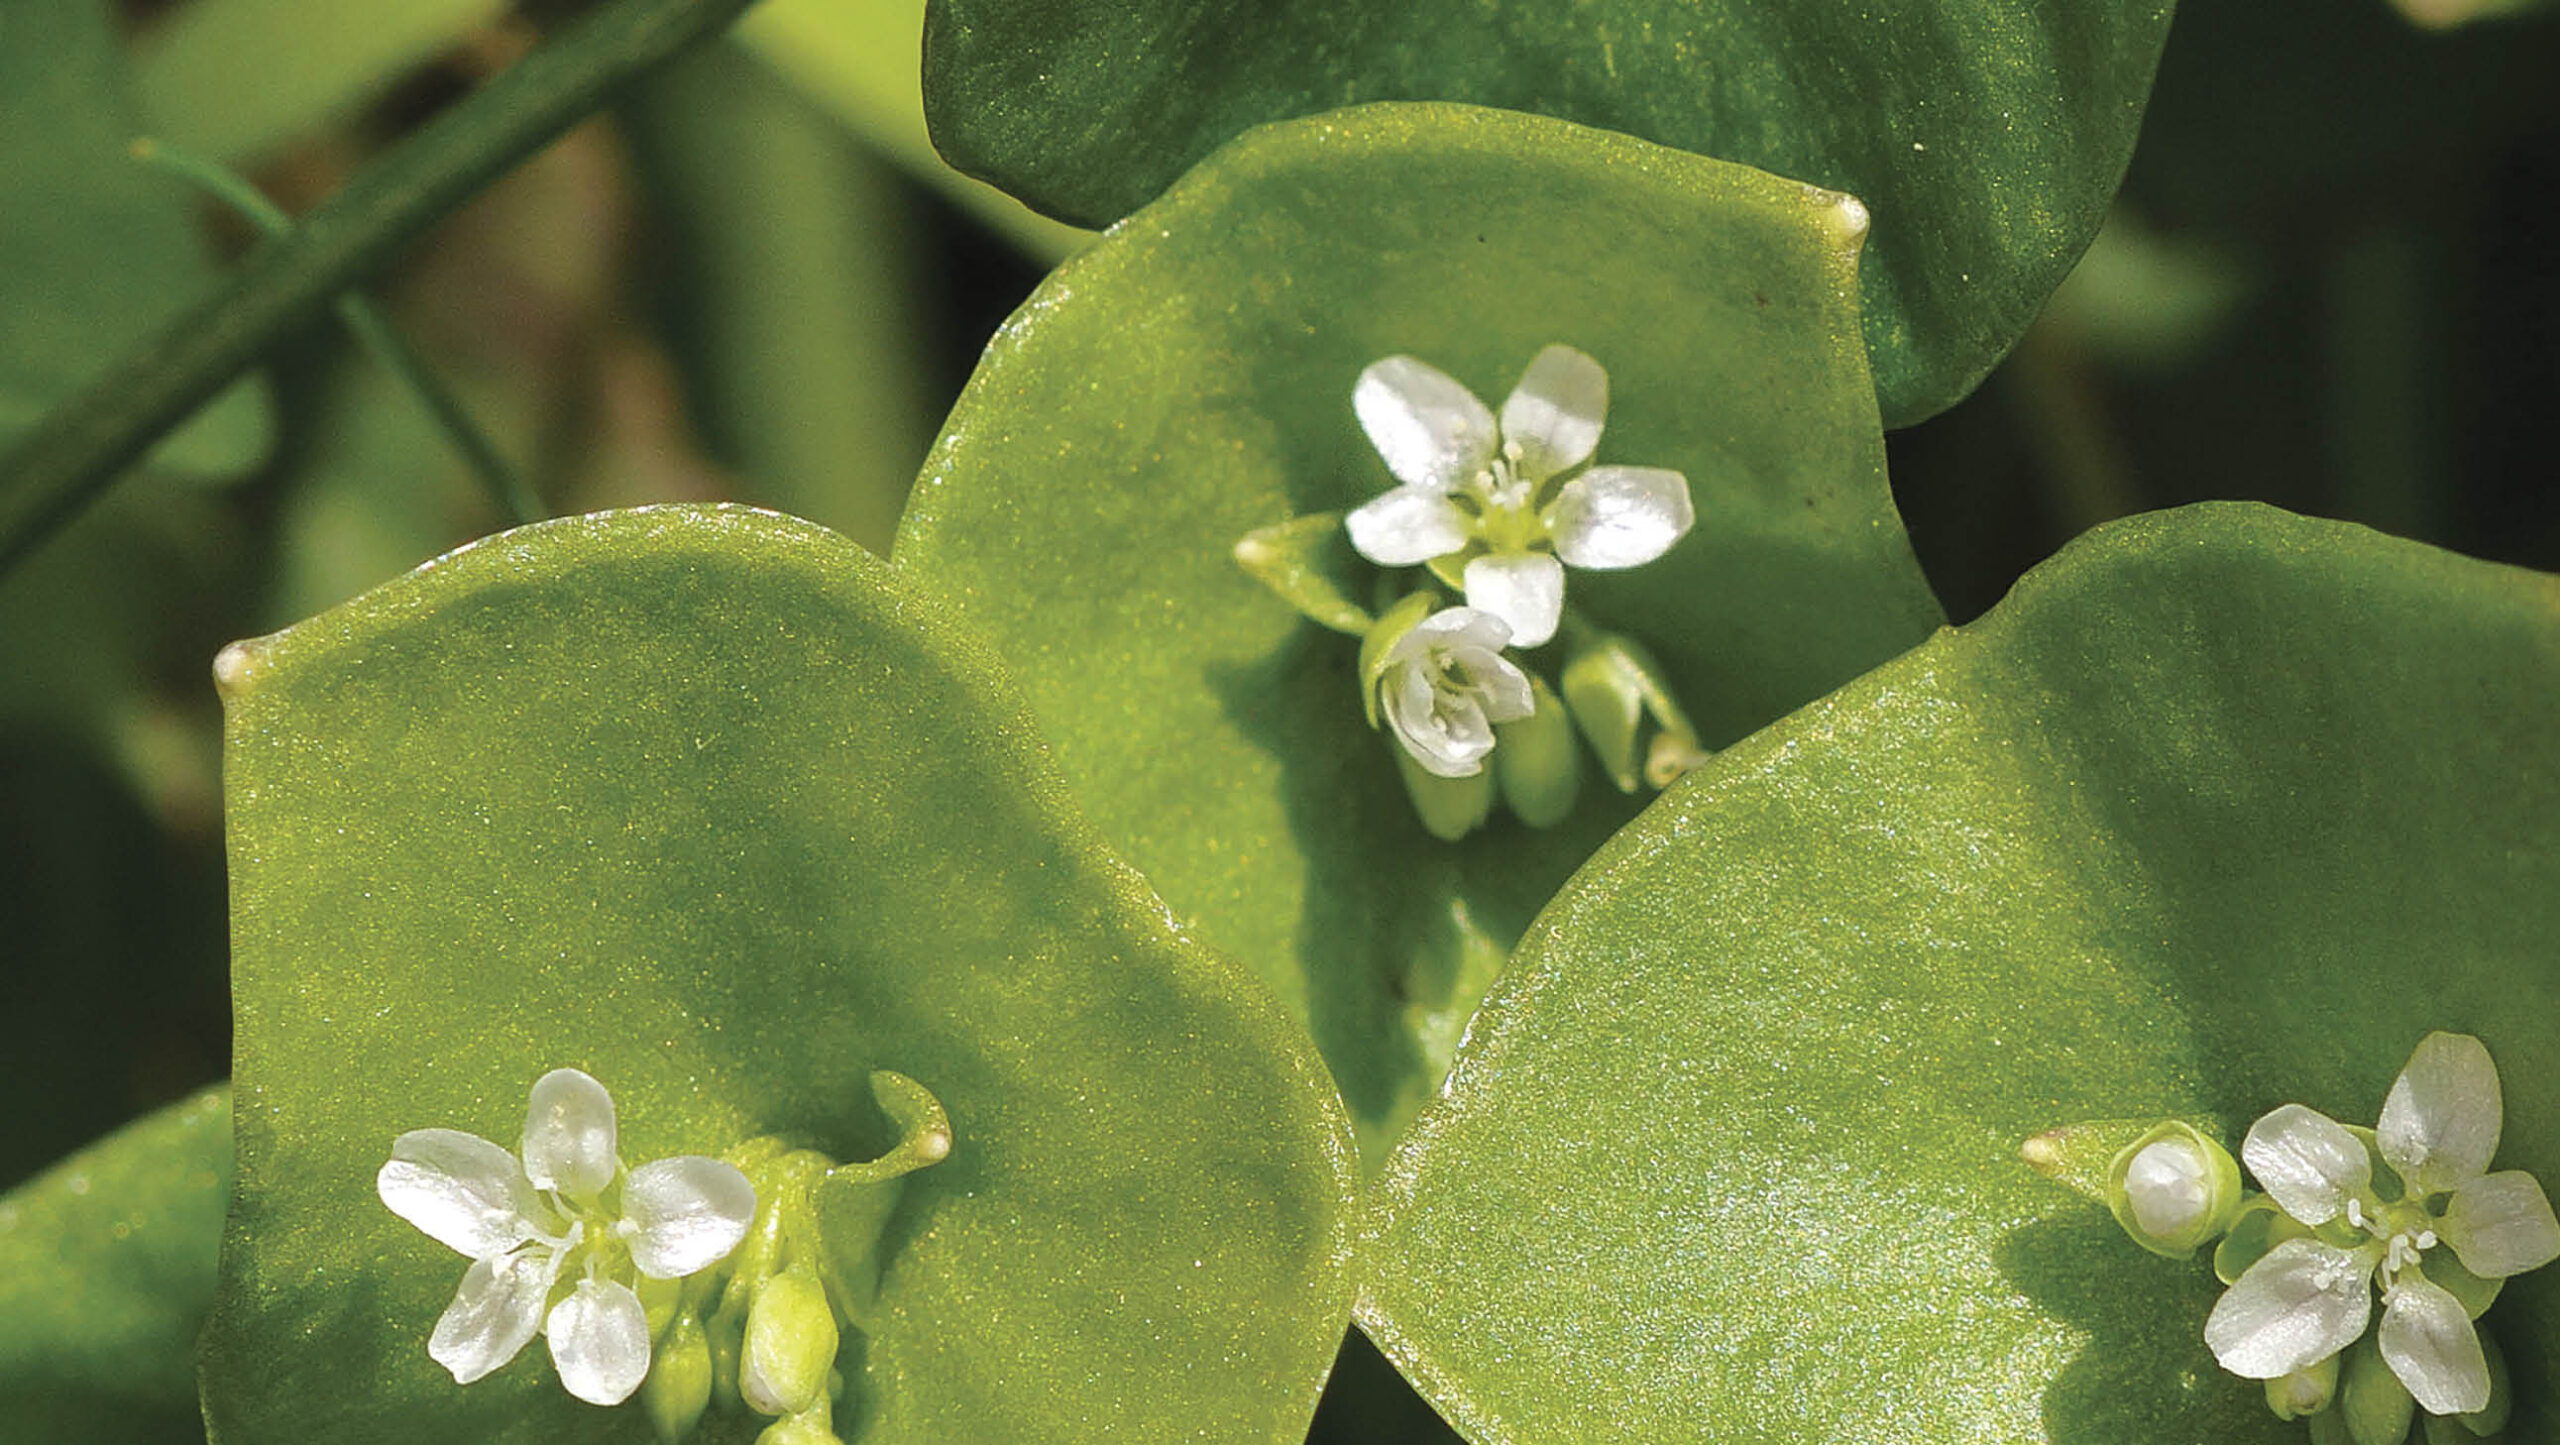 Miner's lettuce leaves can be eaten fresh or lightly cooked as you would spinach.